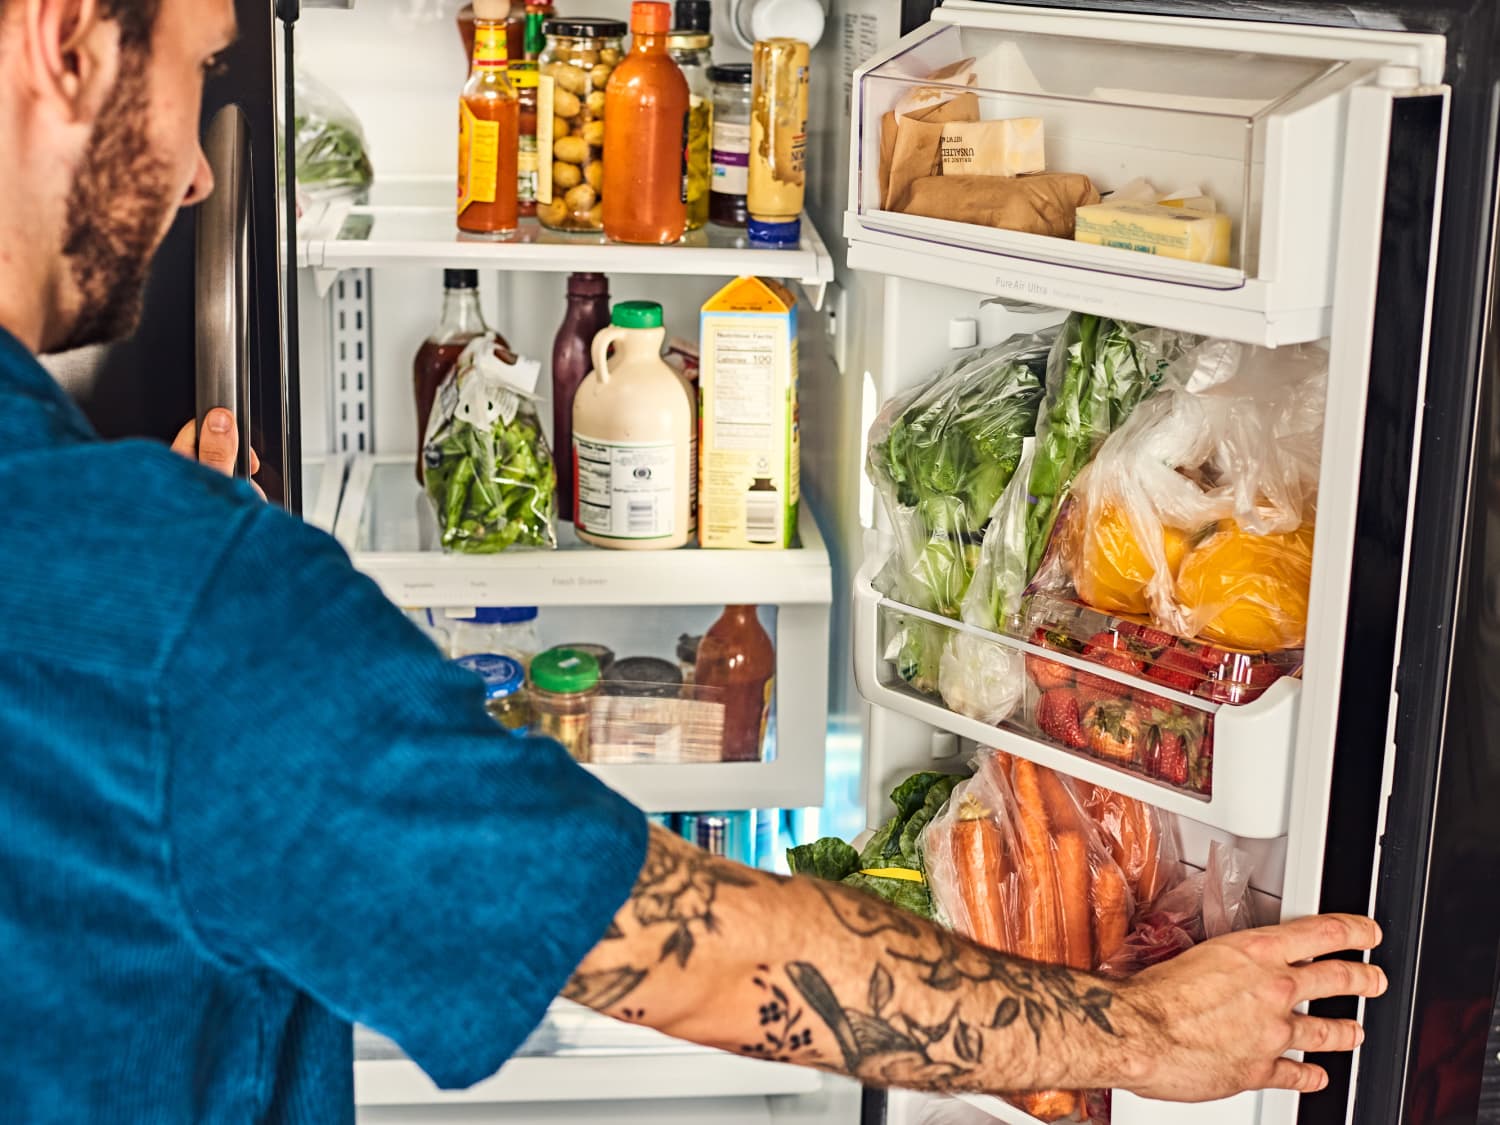 How to Organize a Fridge the Right Way